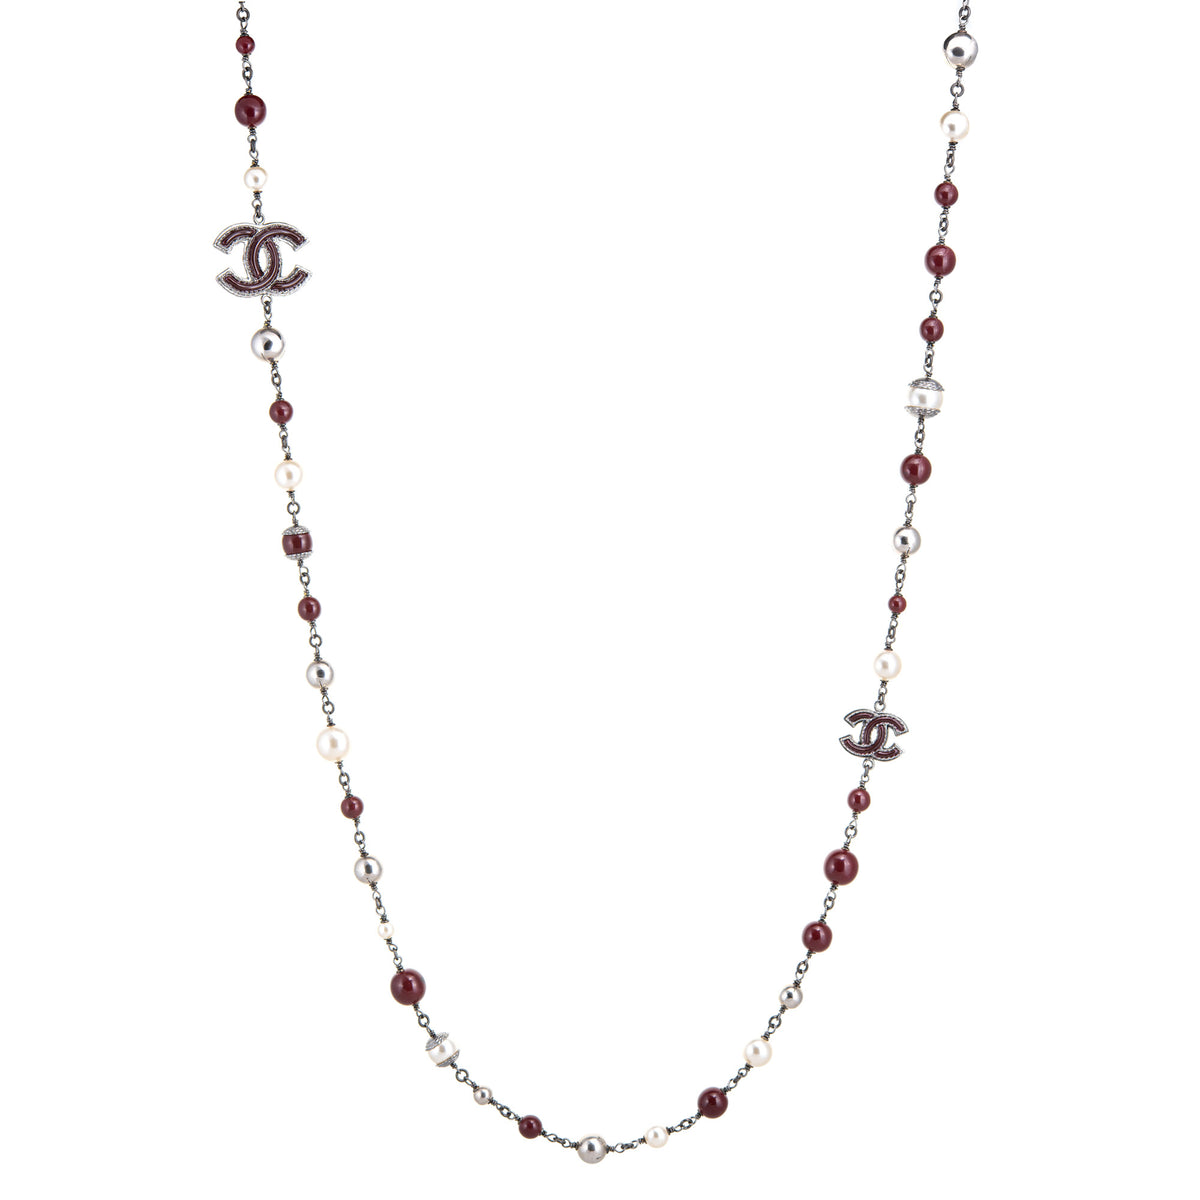 Chanel Graduated Long Maroon Bead Necklace